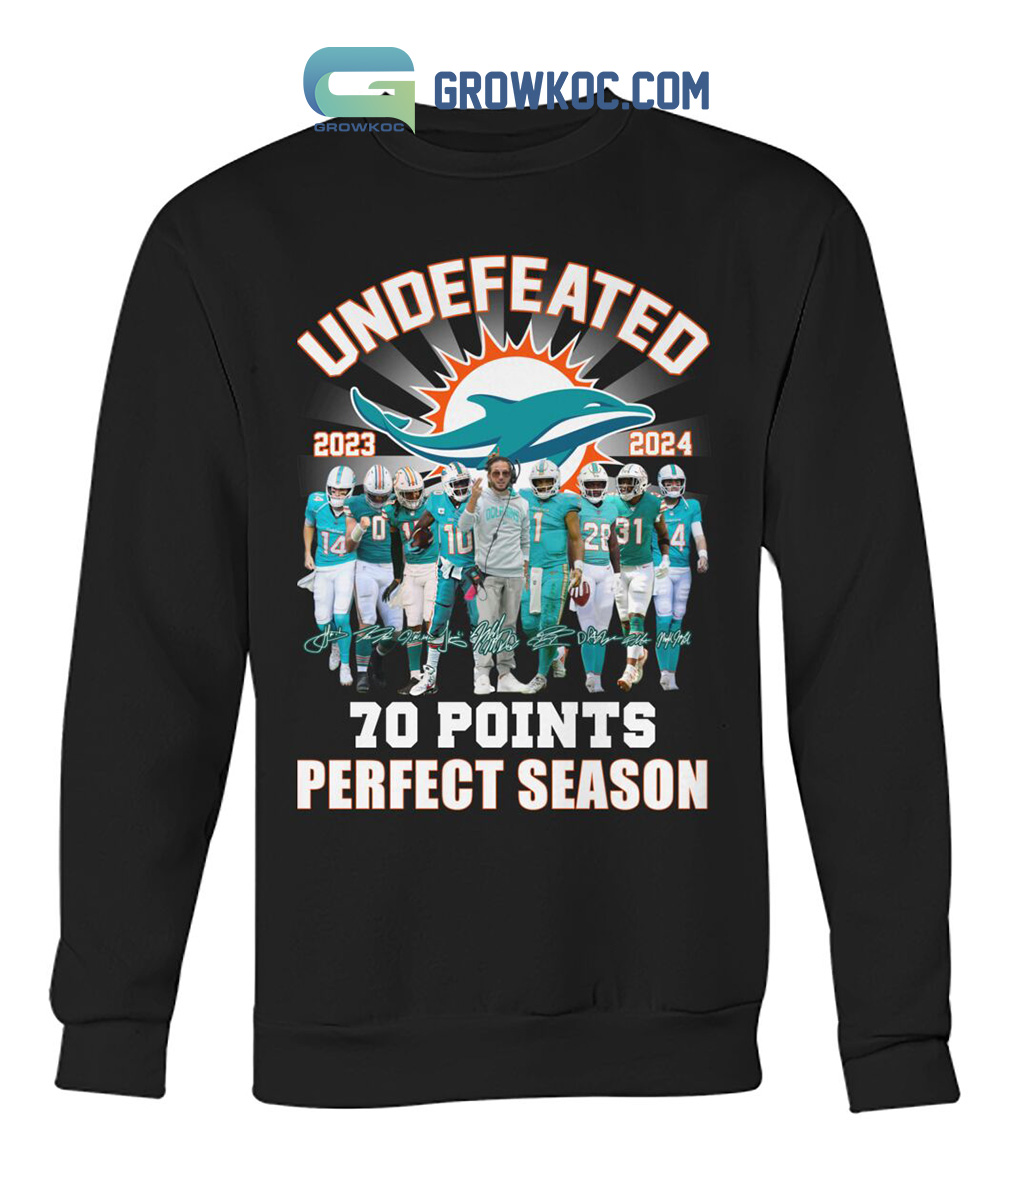 Miami Dolphins Undefeated 2023 2024 70 Points Shirt - Growkoc